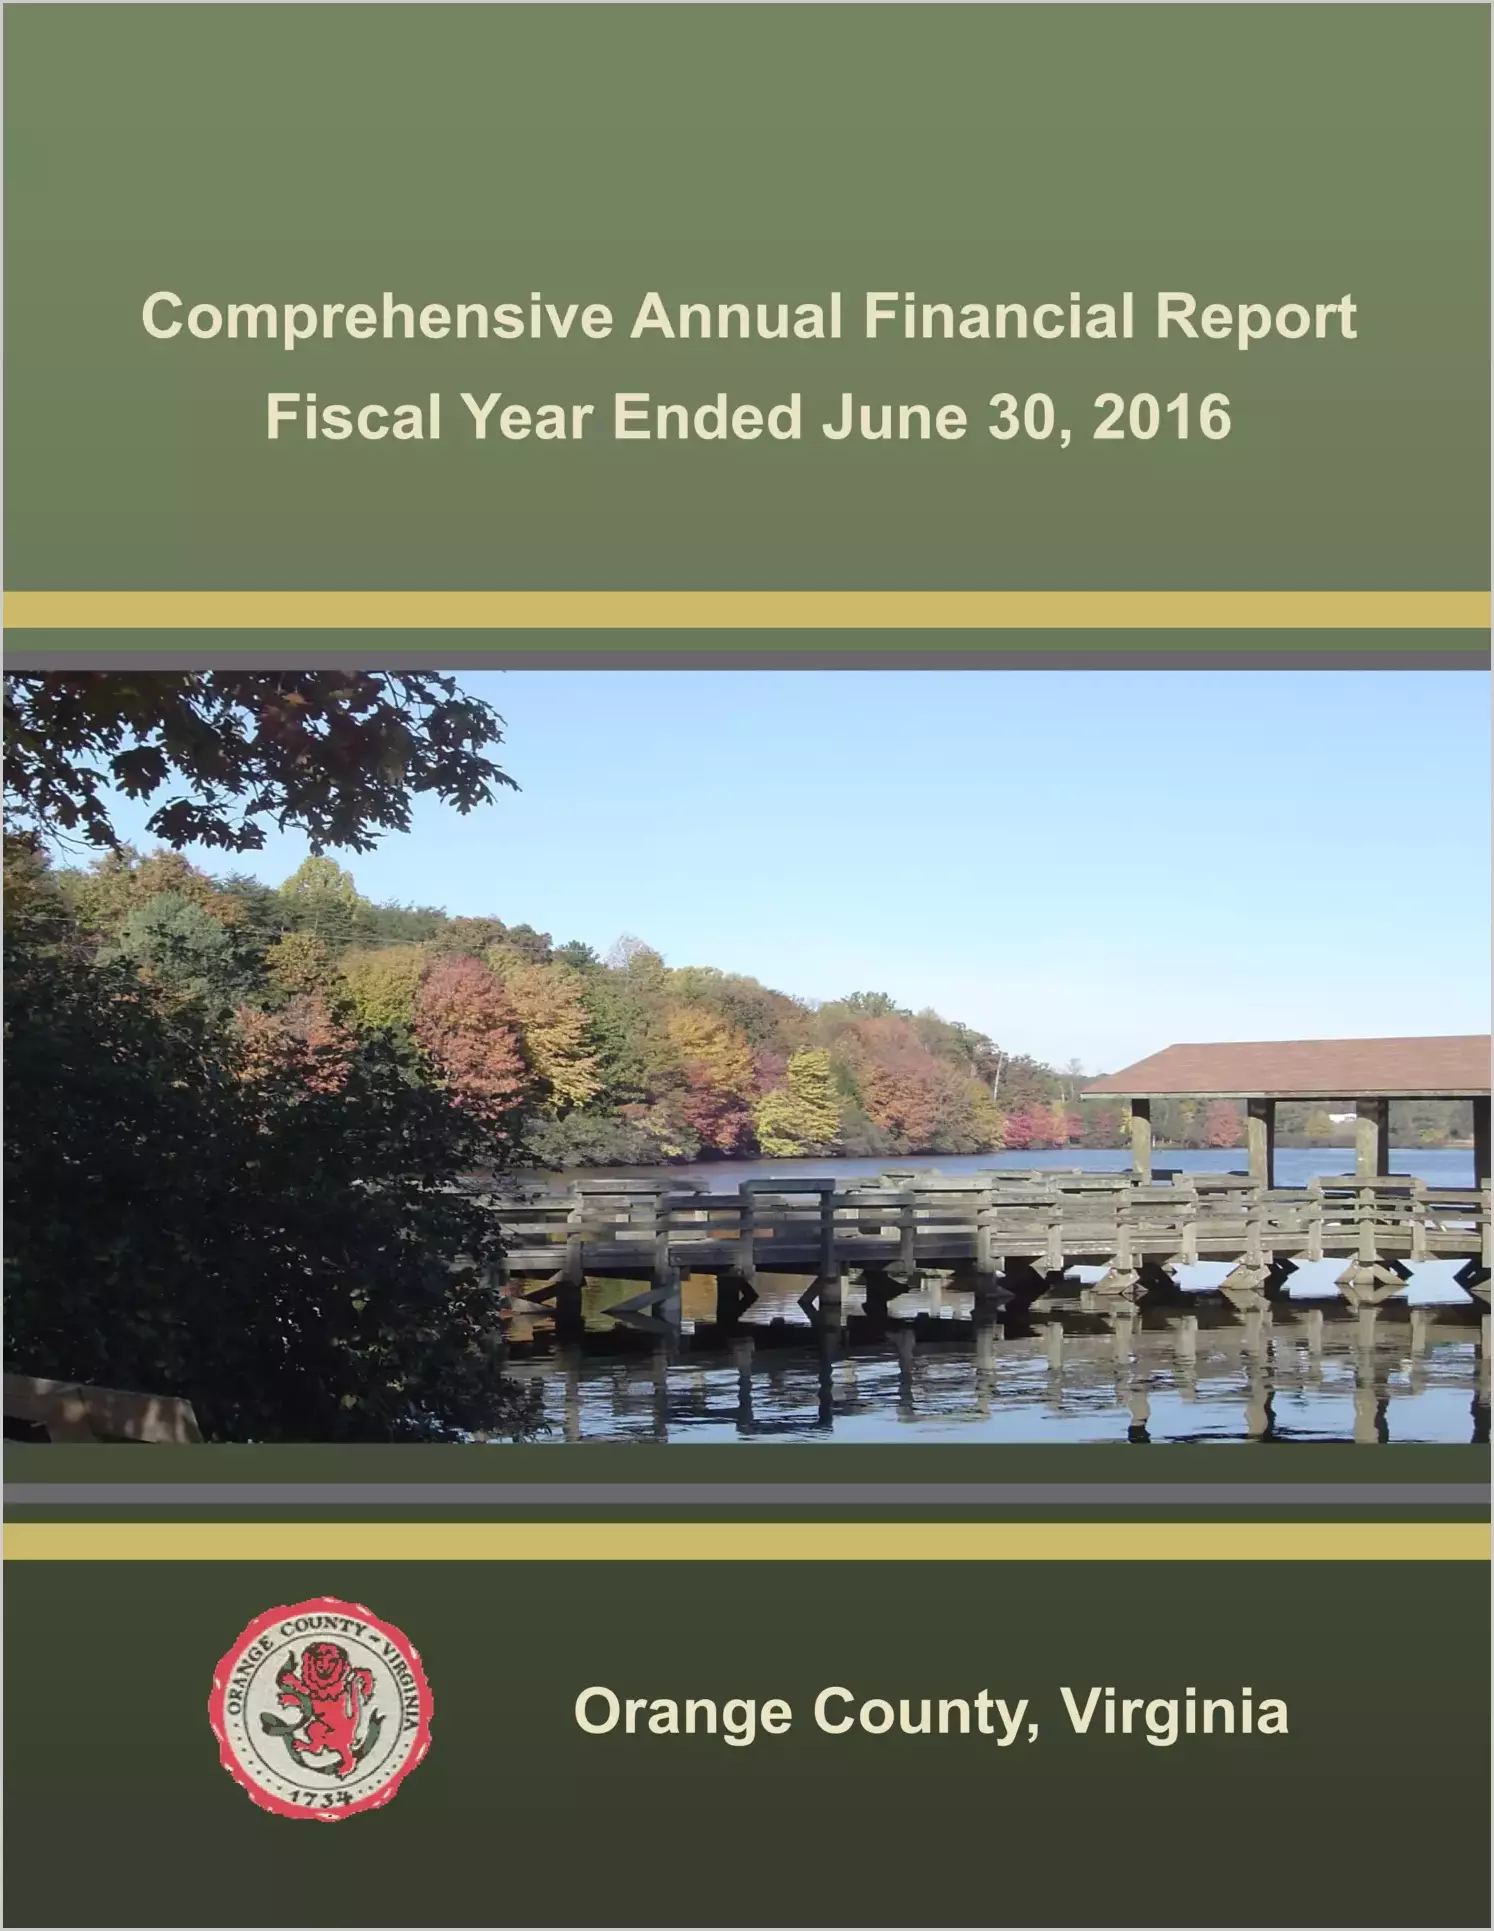 2016 Annual Financial Report for County of Orange